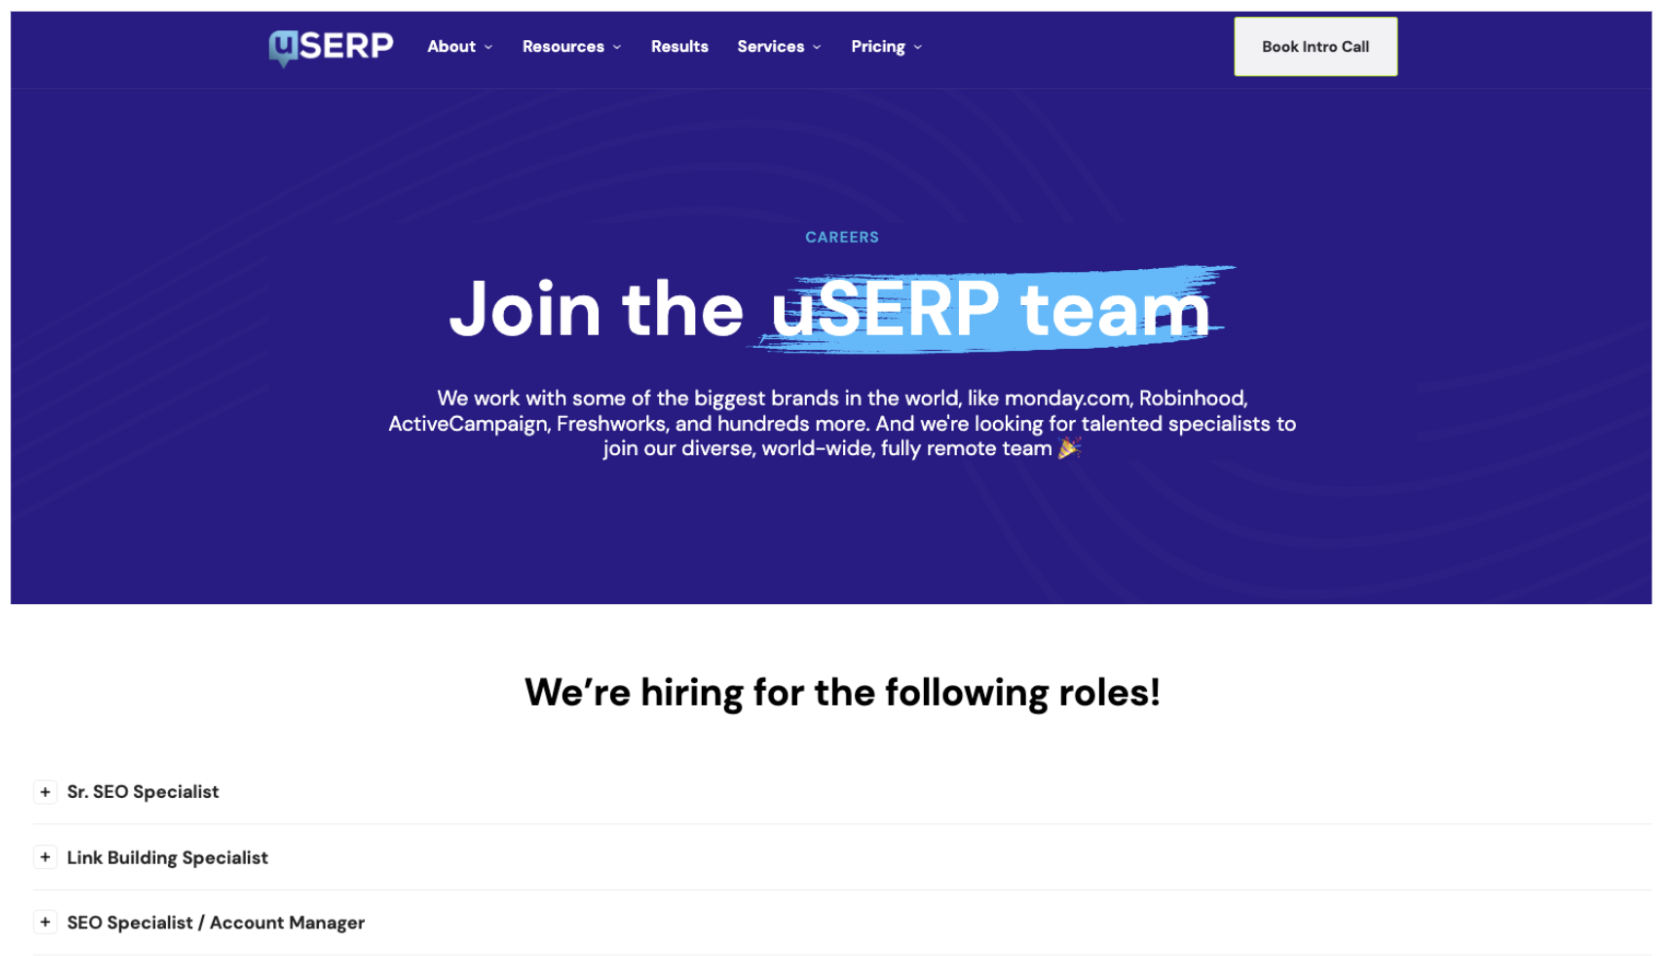 uSERP's careers page